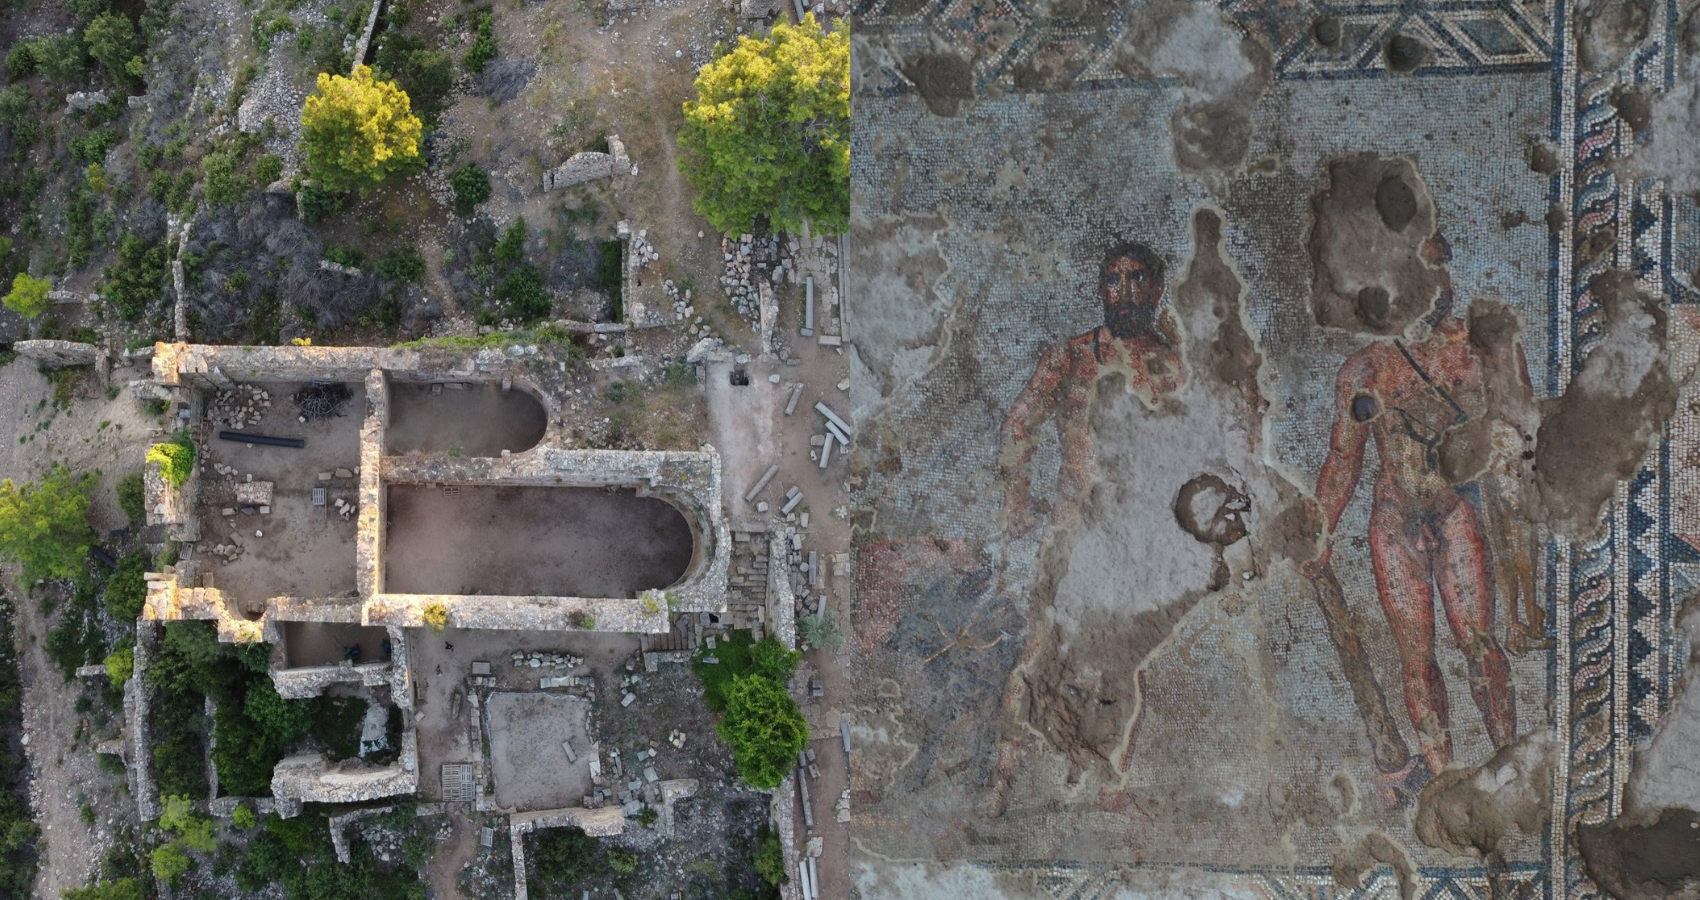 164-square-meter Heracles mosaic found in Turkey’s Alanya